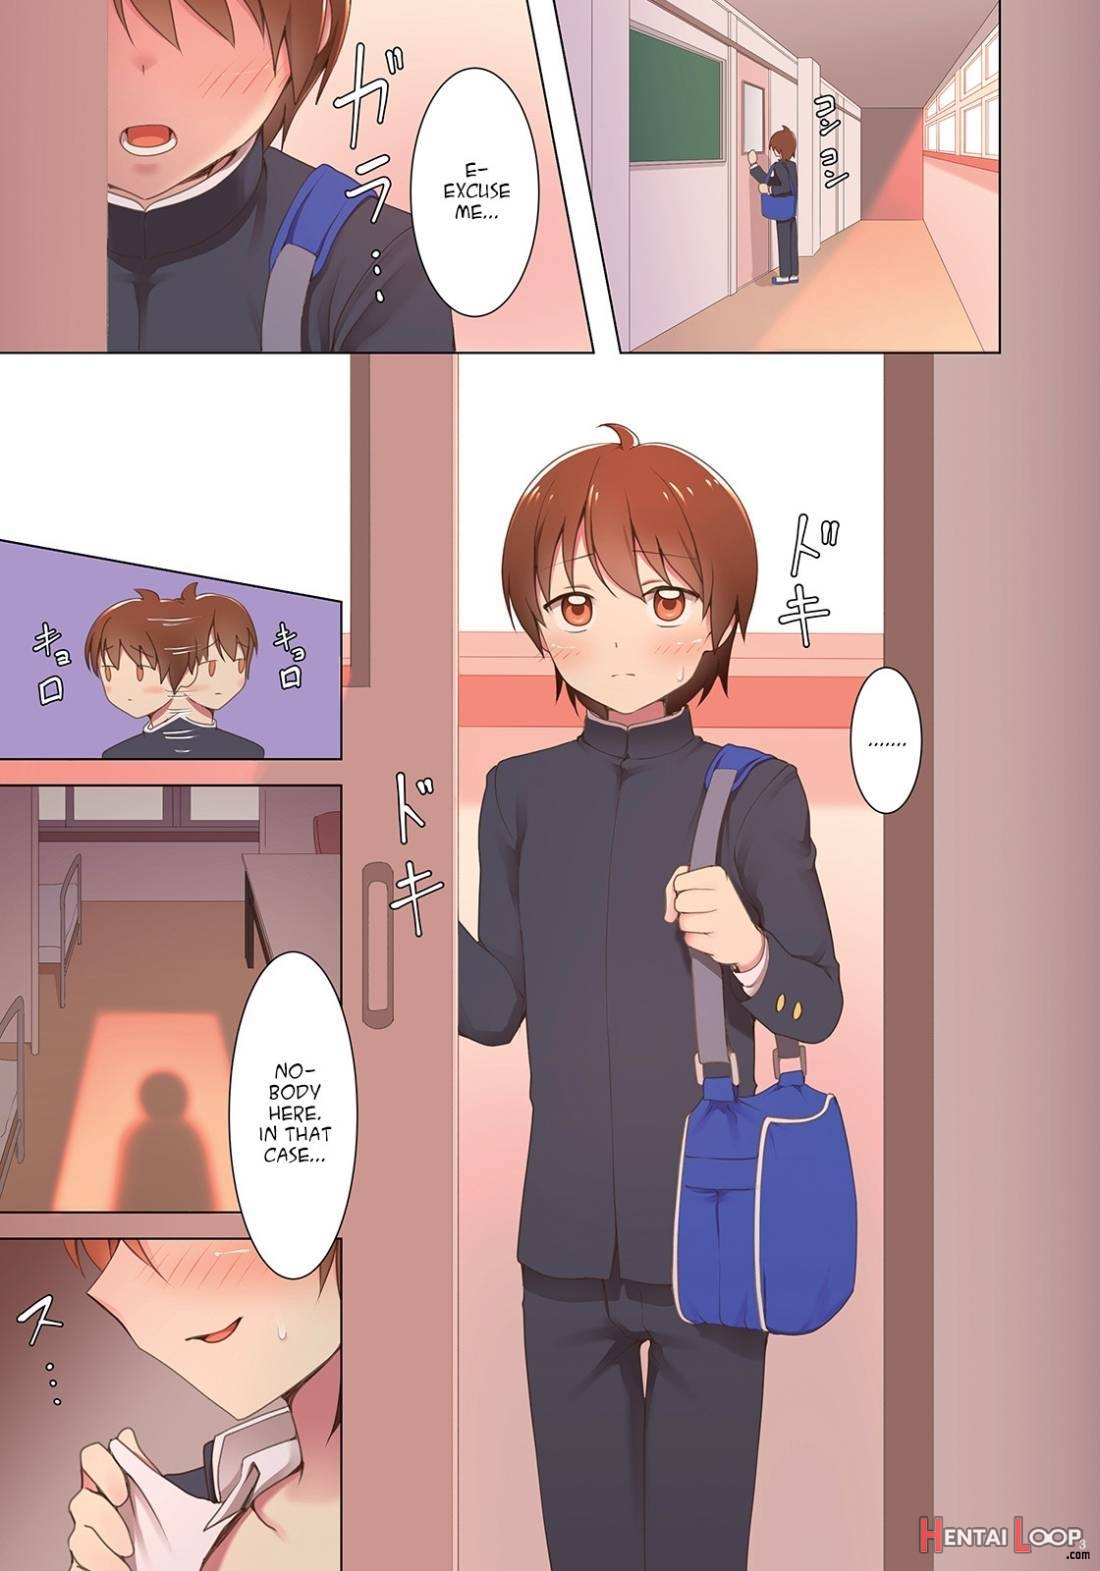 The Crossdressing Adventure in the School Building at Sunset page 3